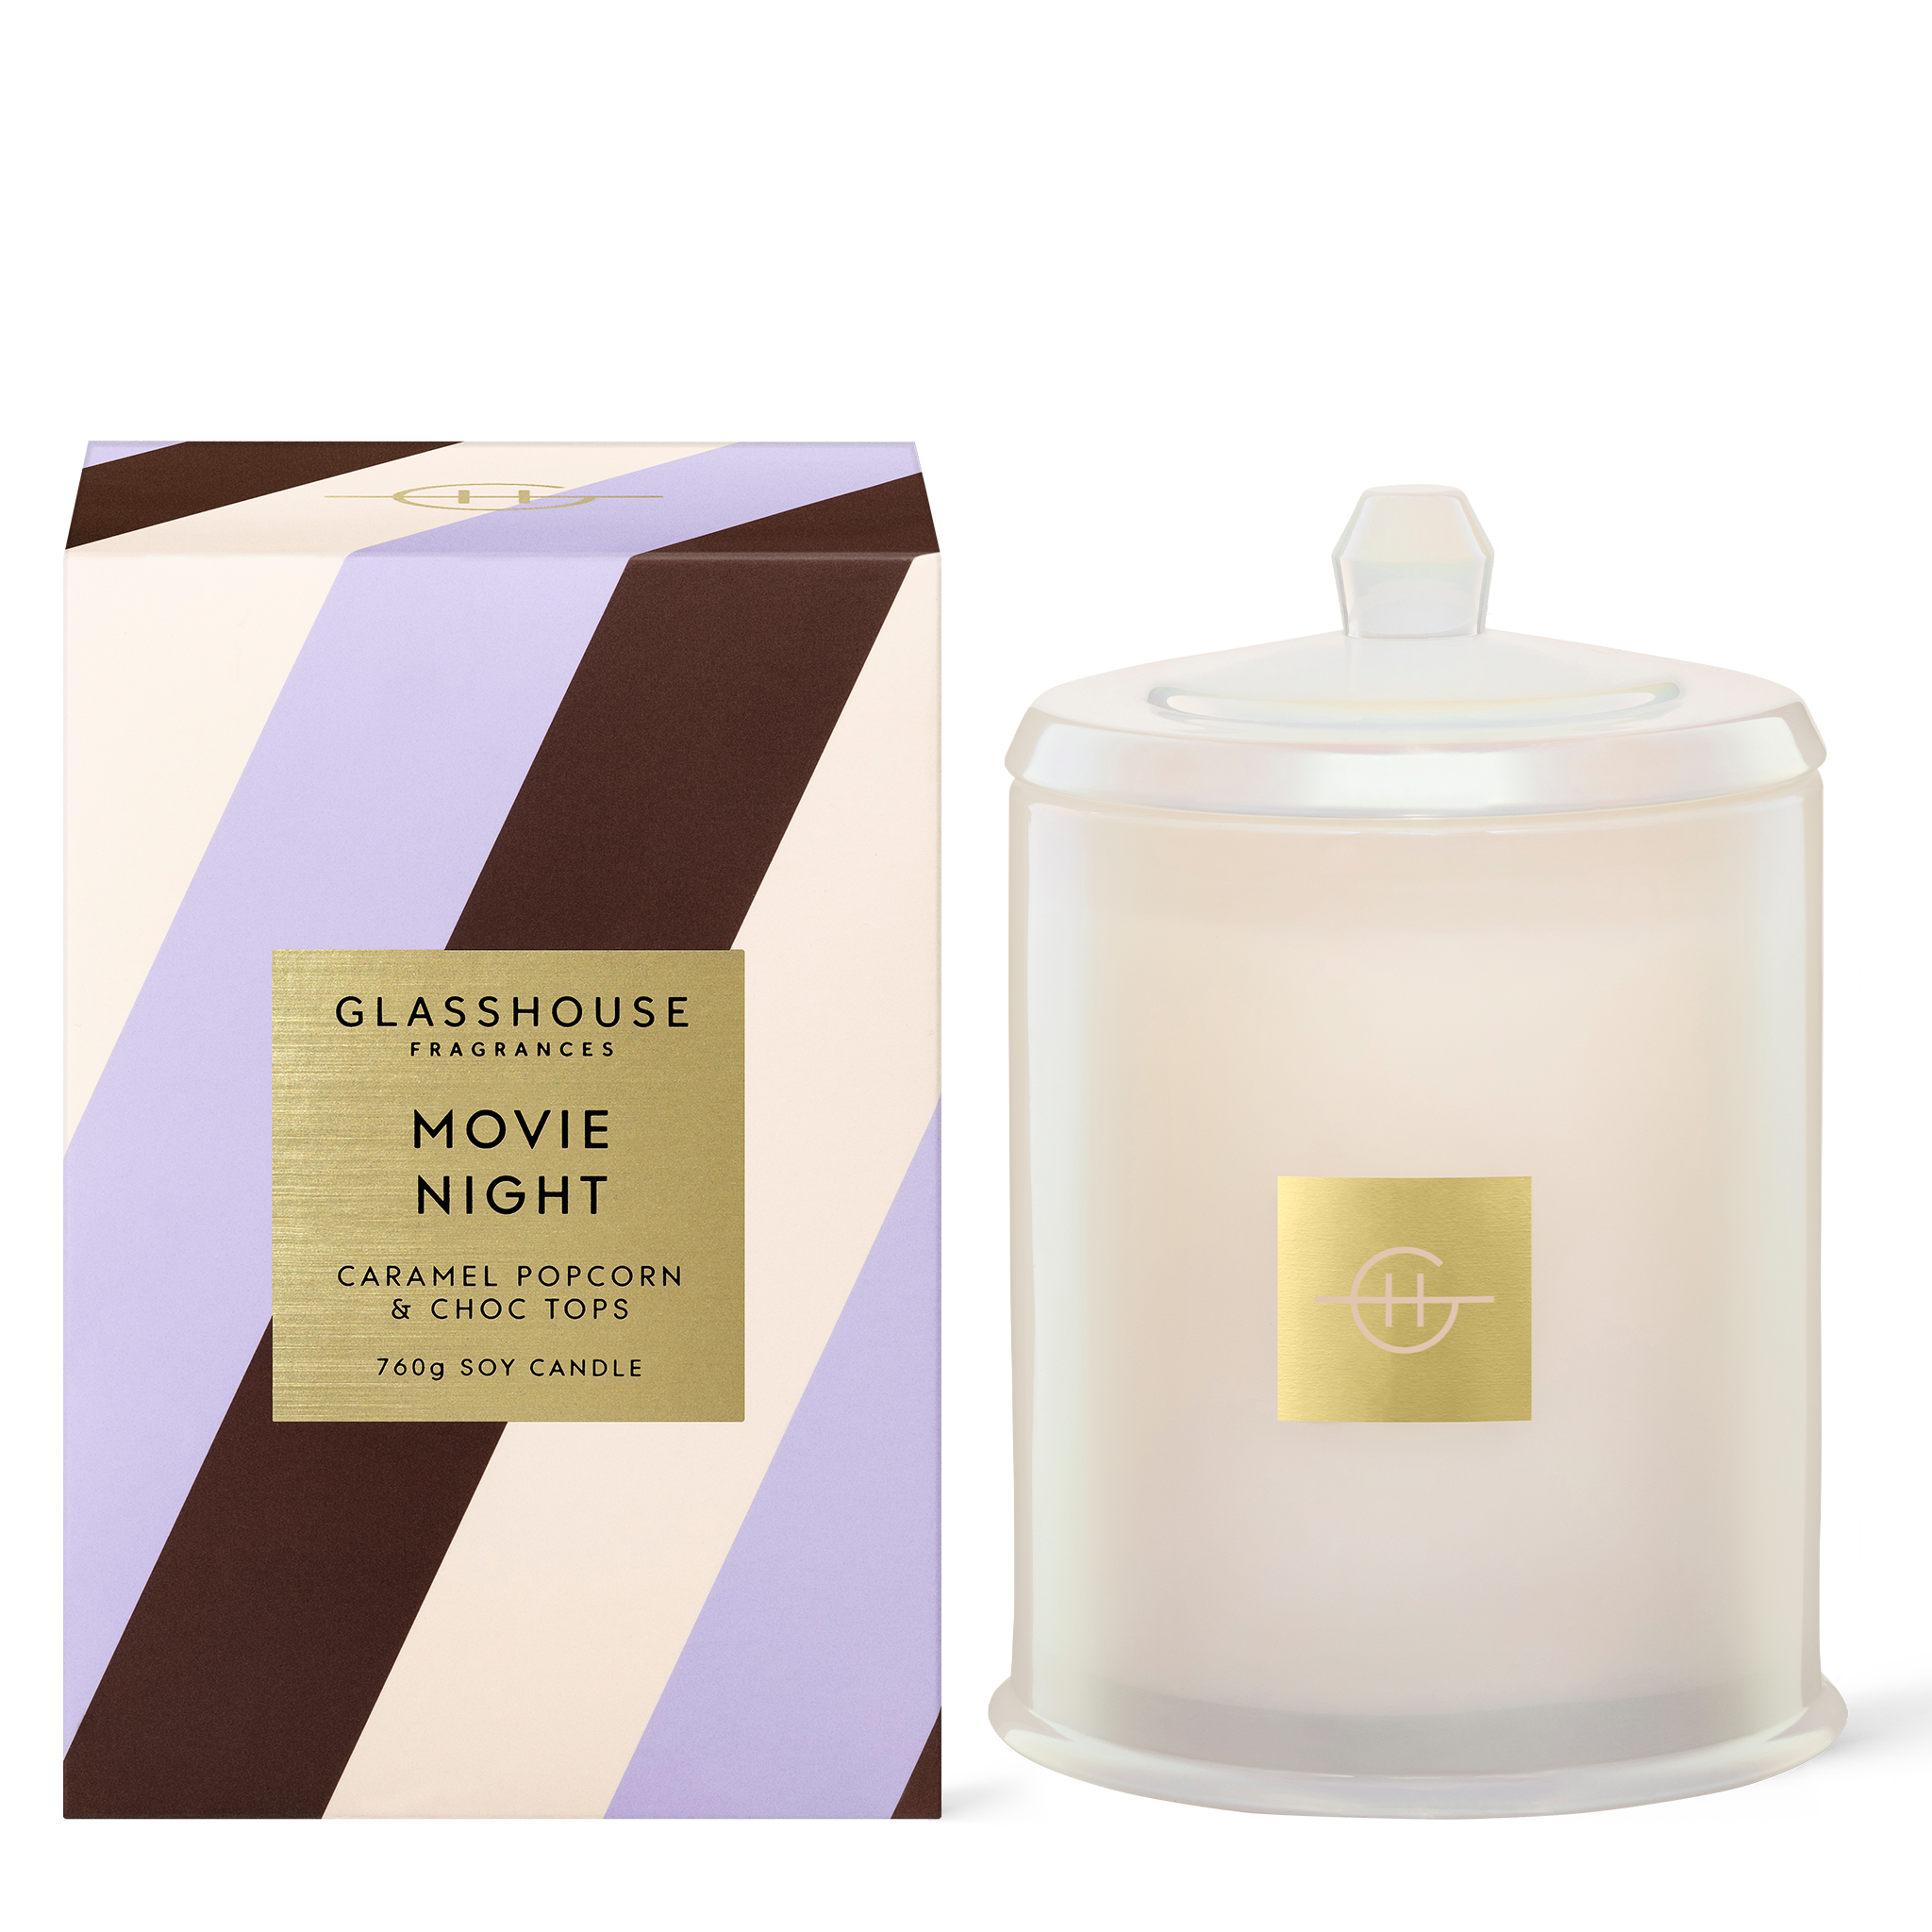 Glasshouse Fragrances Movie Night Popcorn and Choc Tops 760g Soy Candle with box